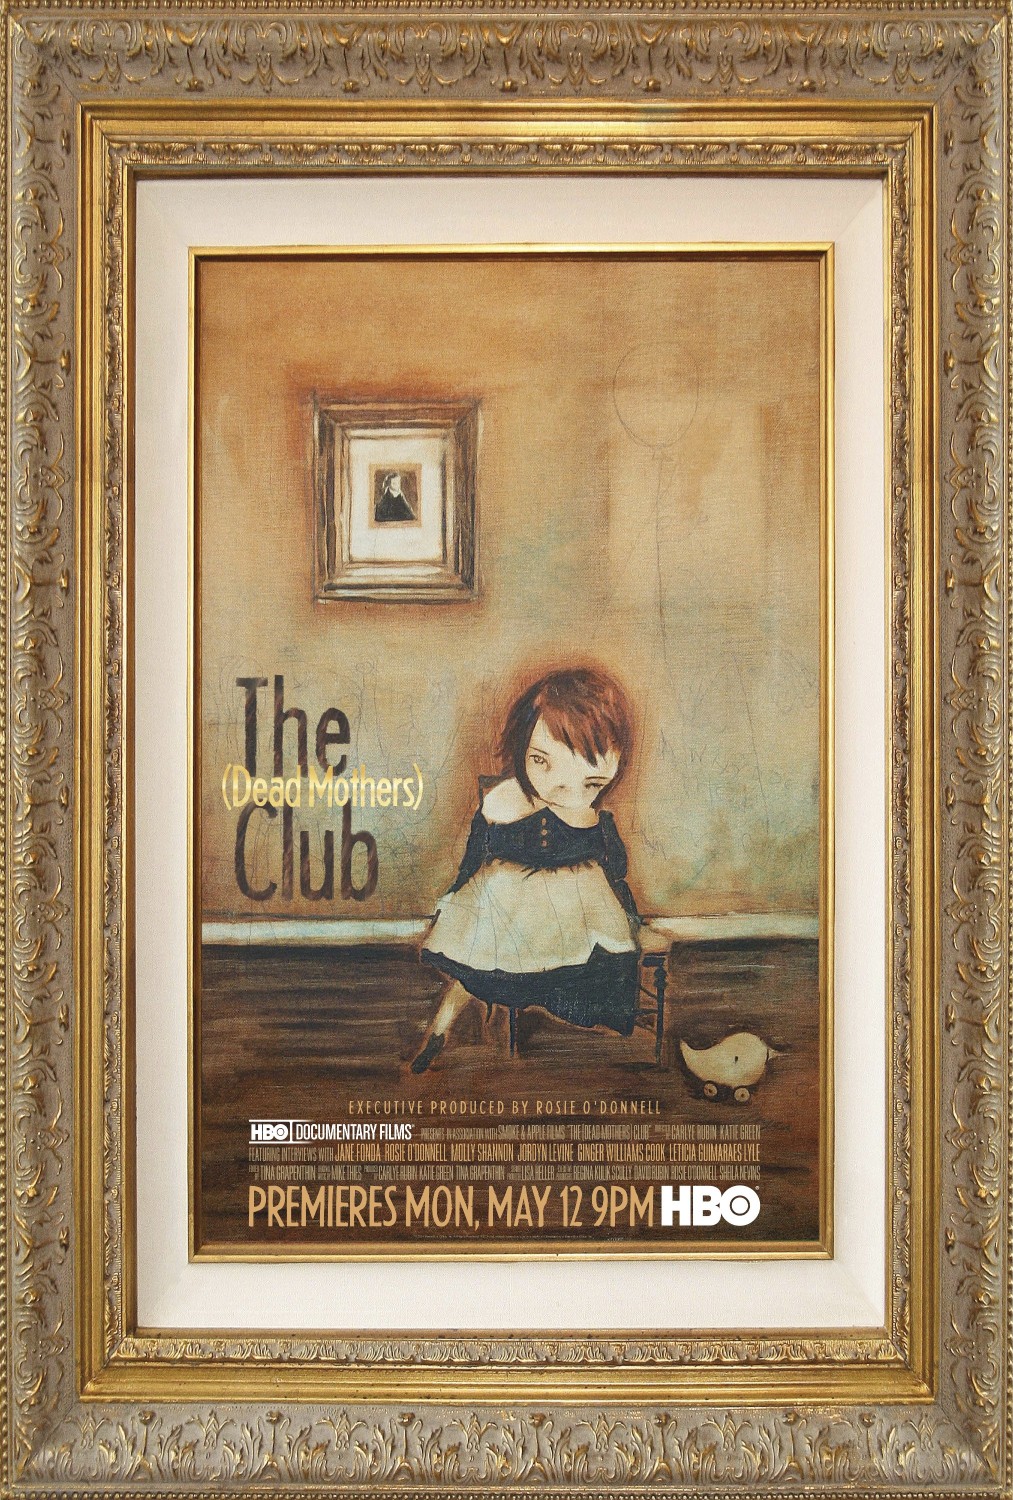 Extra Large TV Poster Image for The (Dead Mothers) Club 